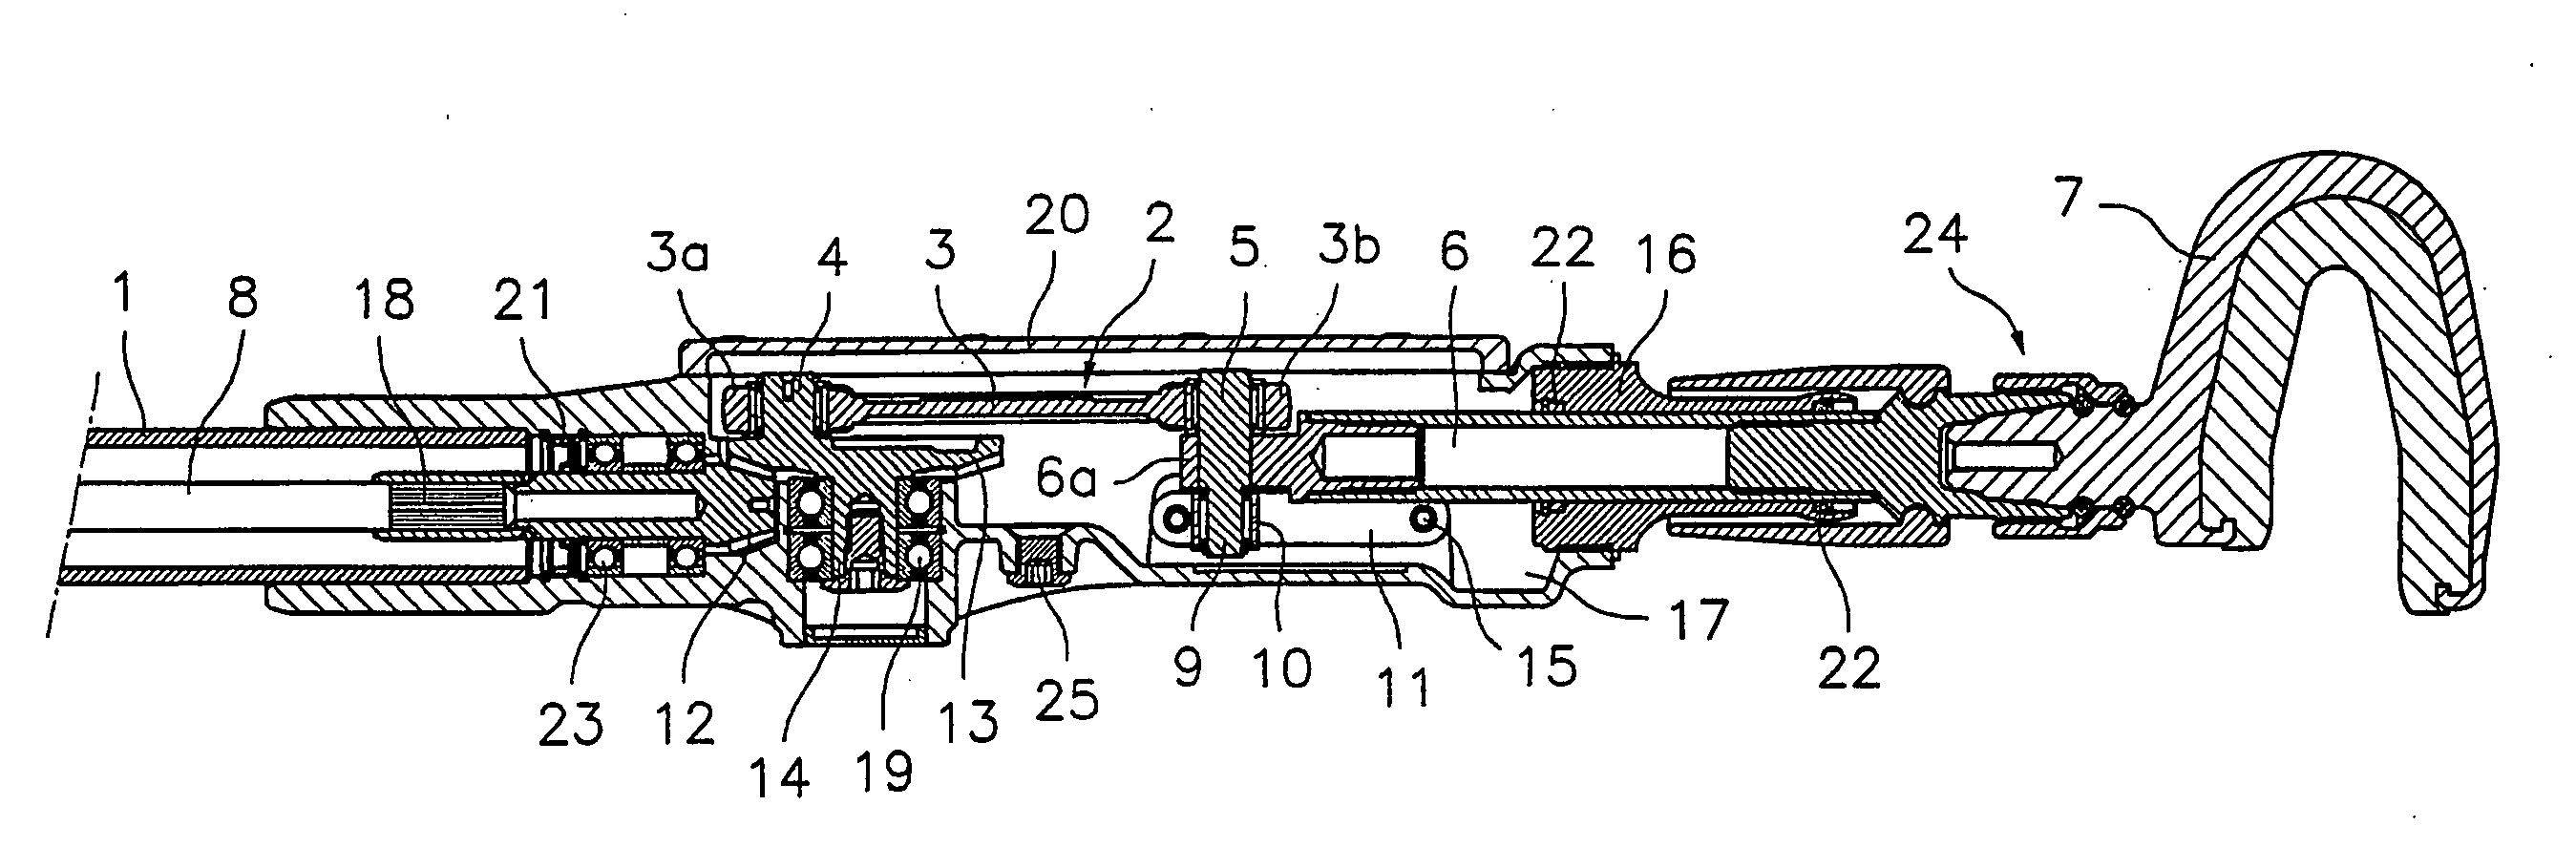 Torque-limiting device in a mechanism used to transform a rotational movement into a reciprocating linear movement or vice versa